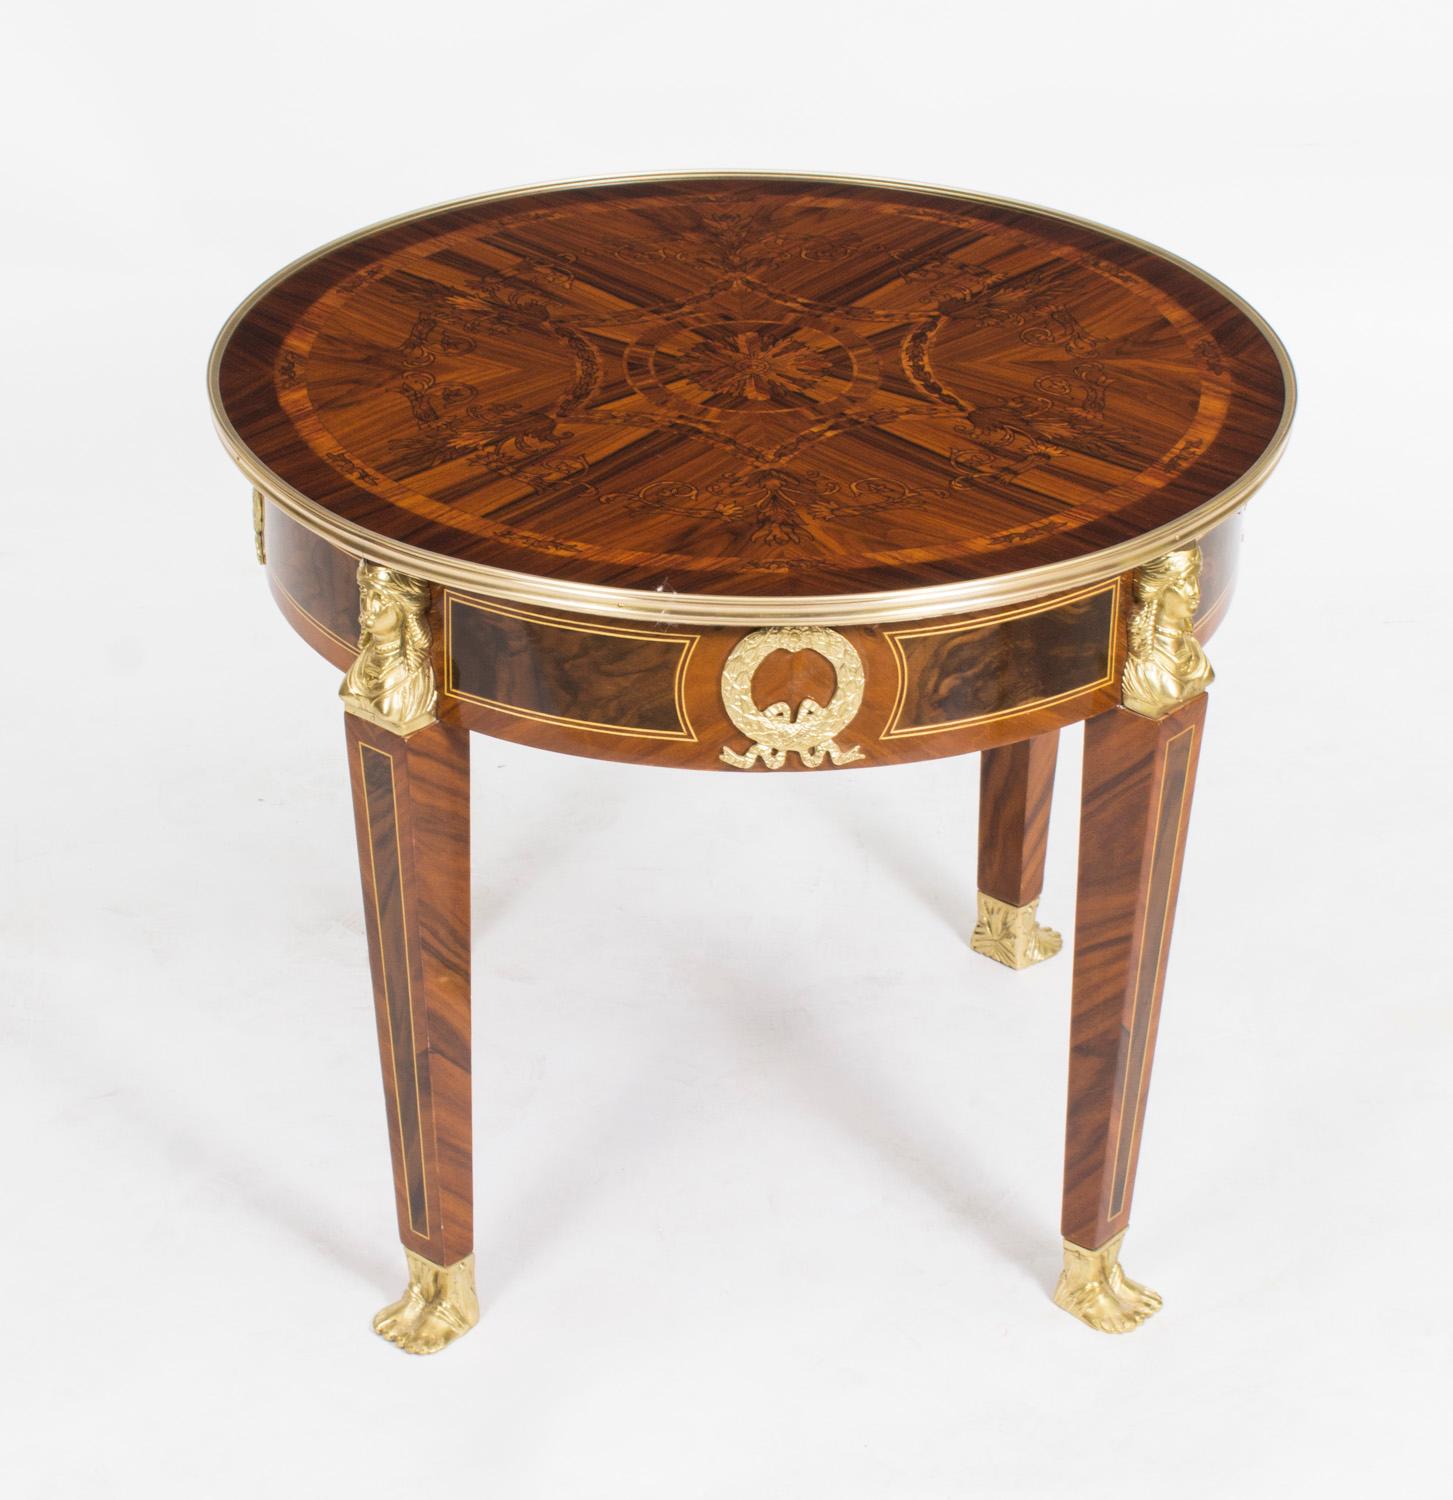 This is a stunning set of three vintage Empire Revival ormolu mounted burr walnut and marquetry inlaid tables comprising a pair of side tables and a coffee table.

They have stunning ormolu decoration with laurel leaves, female caryatids lion's